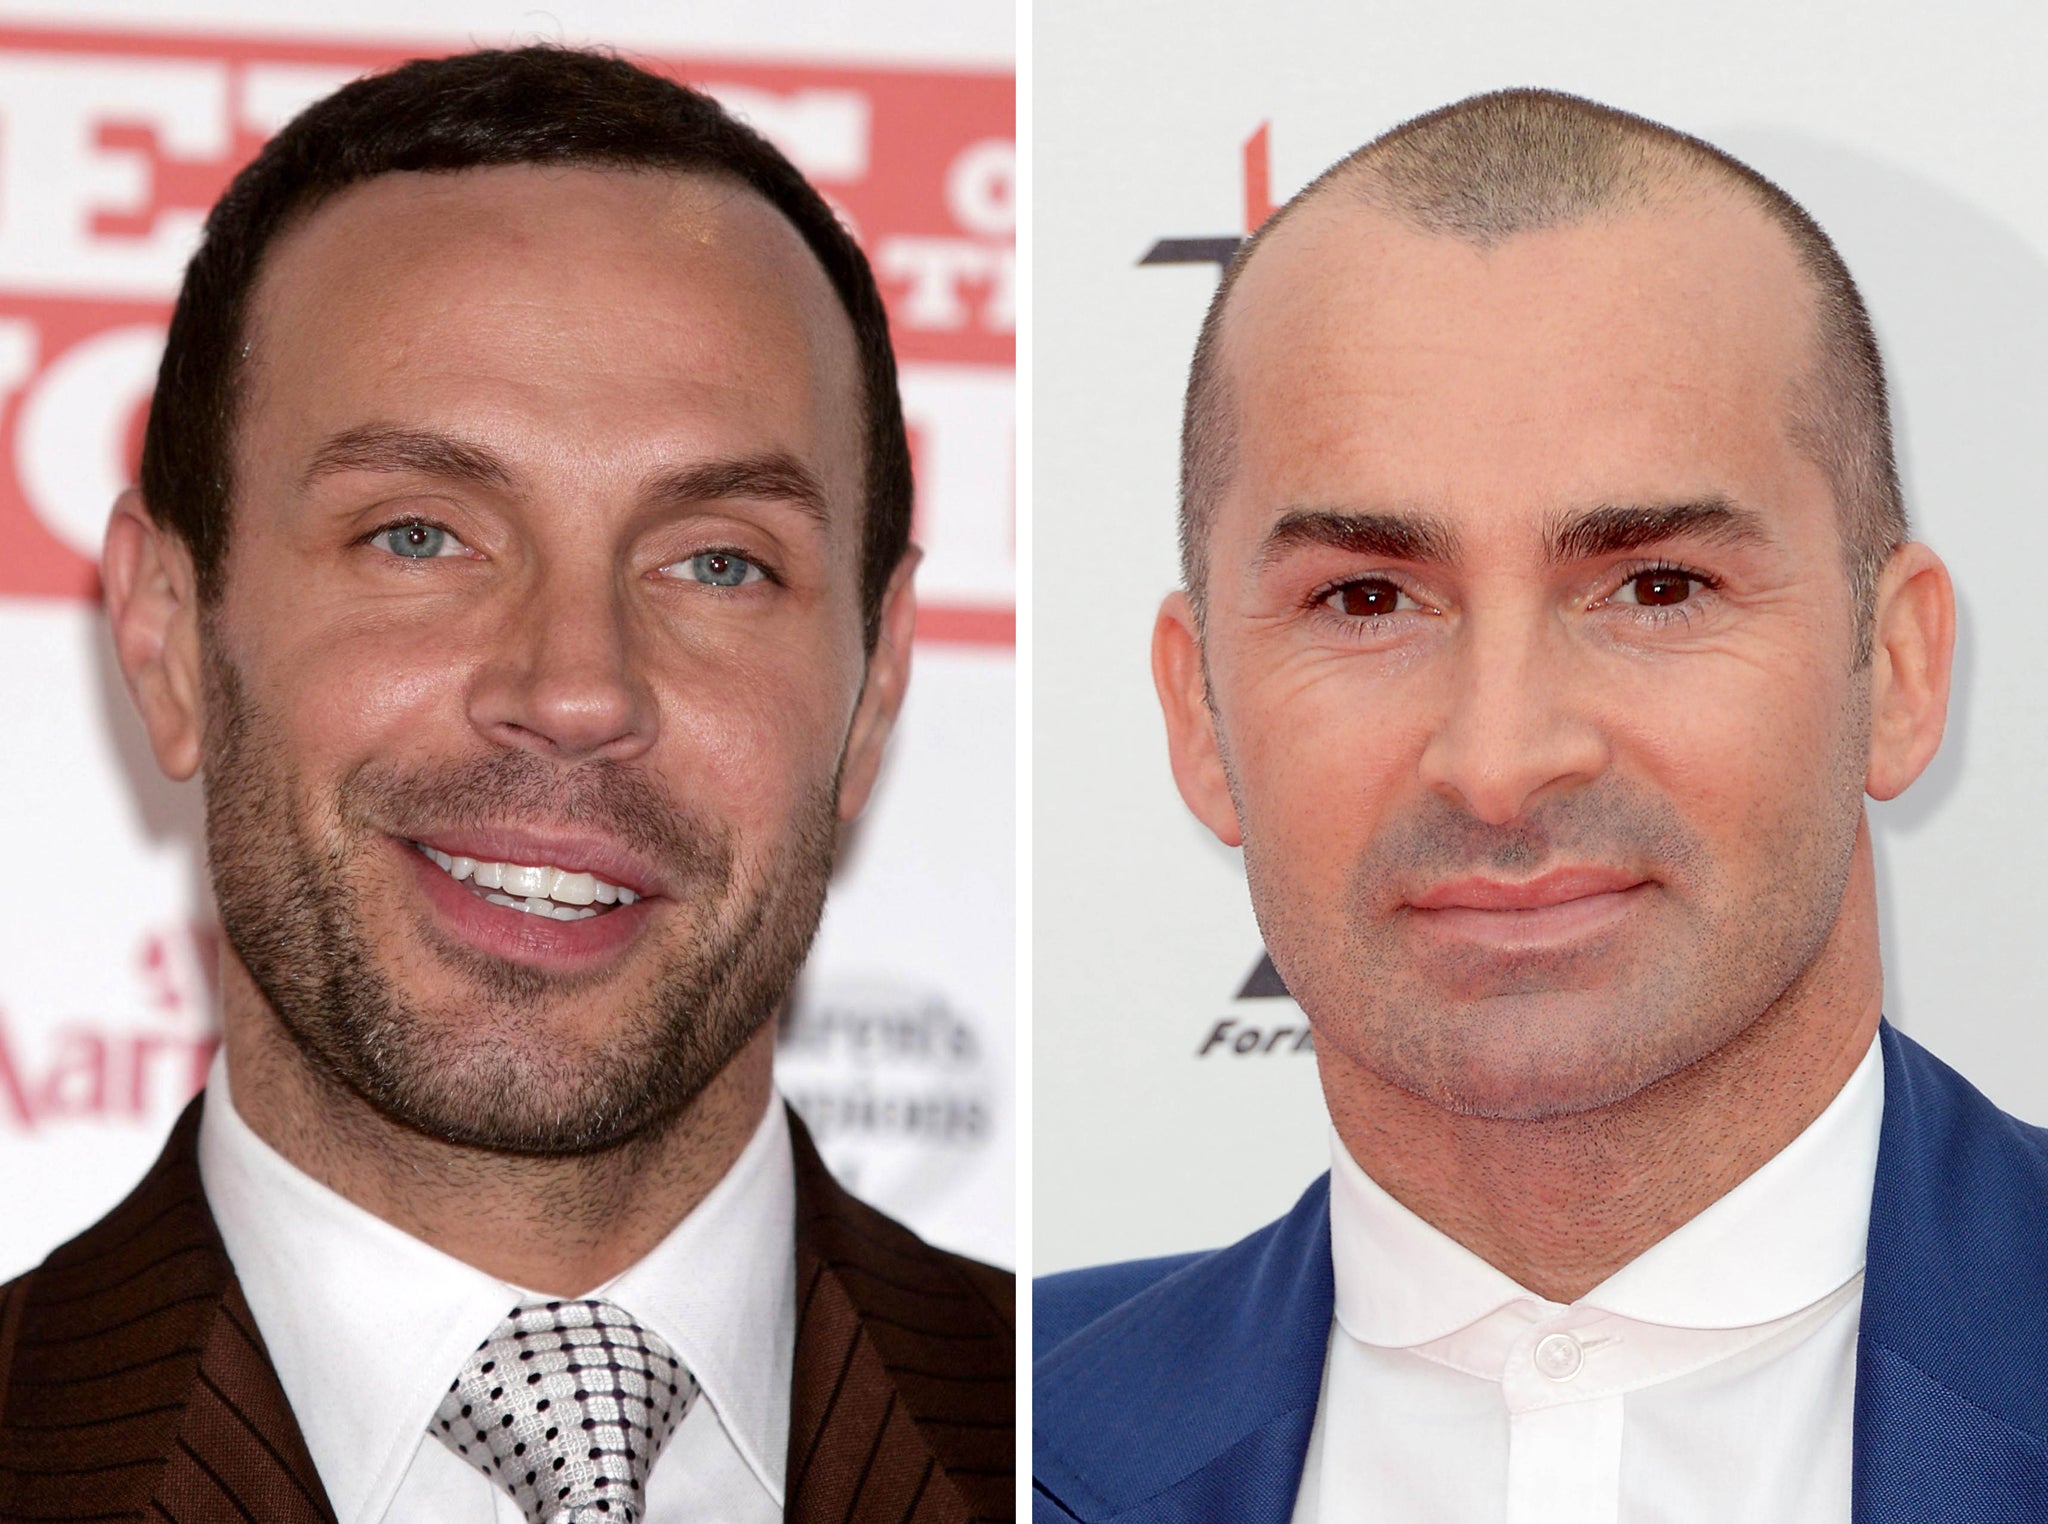 Jason Gardiner (left) and Louie Spence (right) as Gardiner is returning to Dancing On Ice after his replacement Spence was "kicked to the kerb".